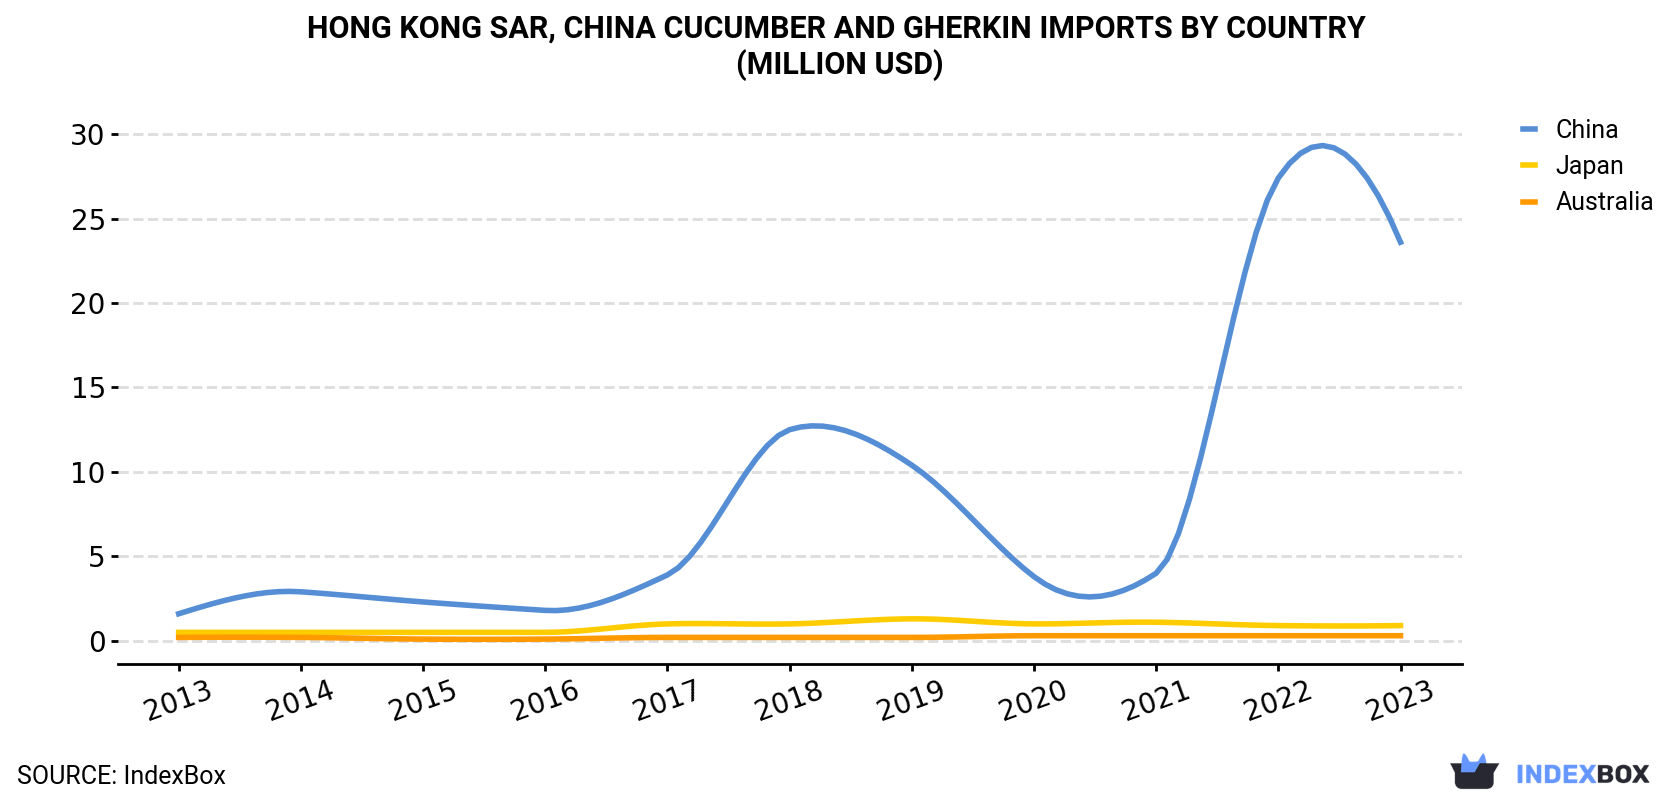 Hong Kong Cucumber And Gherkin Imports By Country (Million USD)